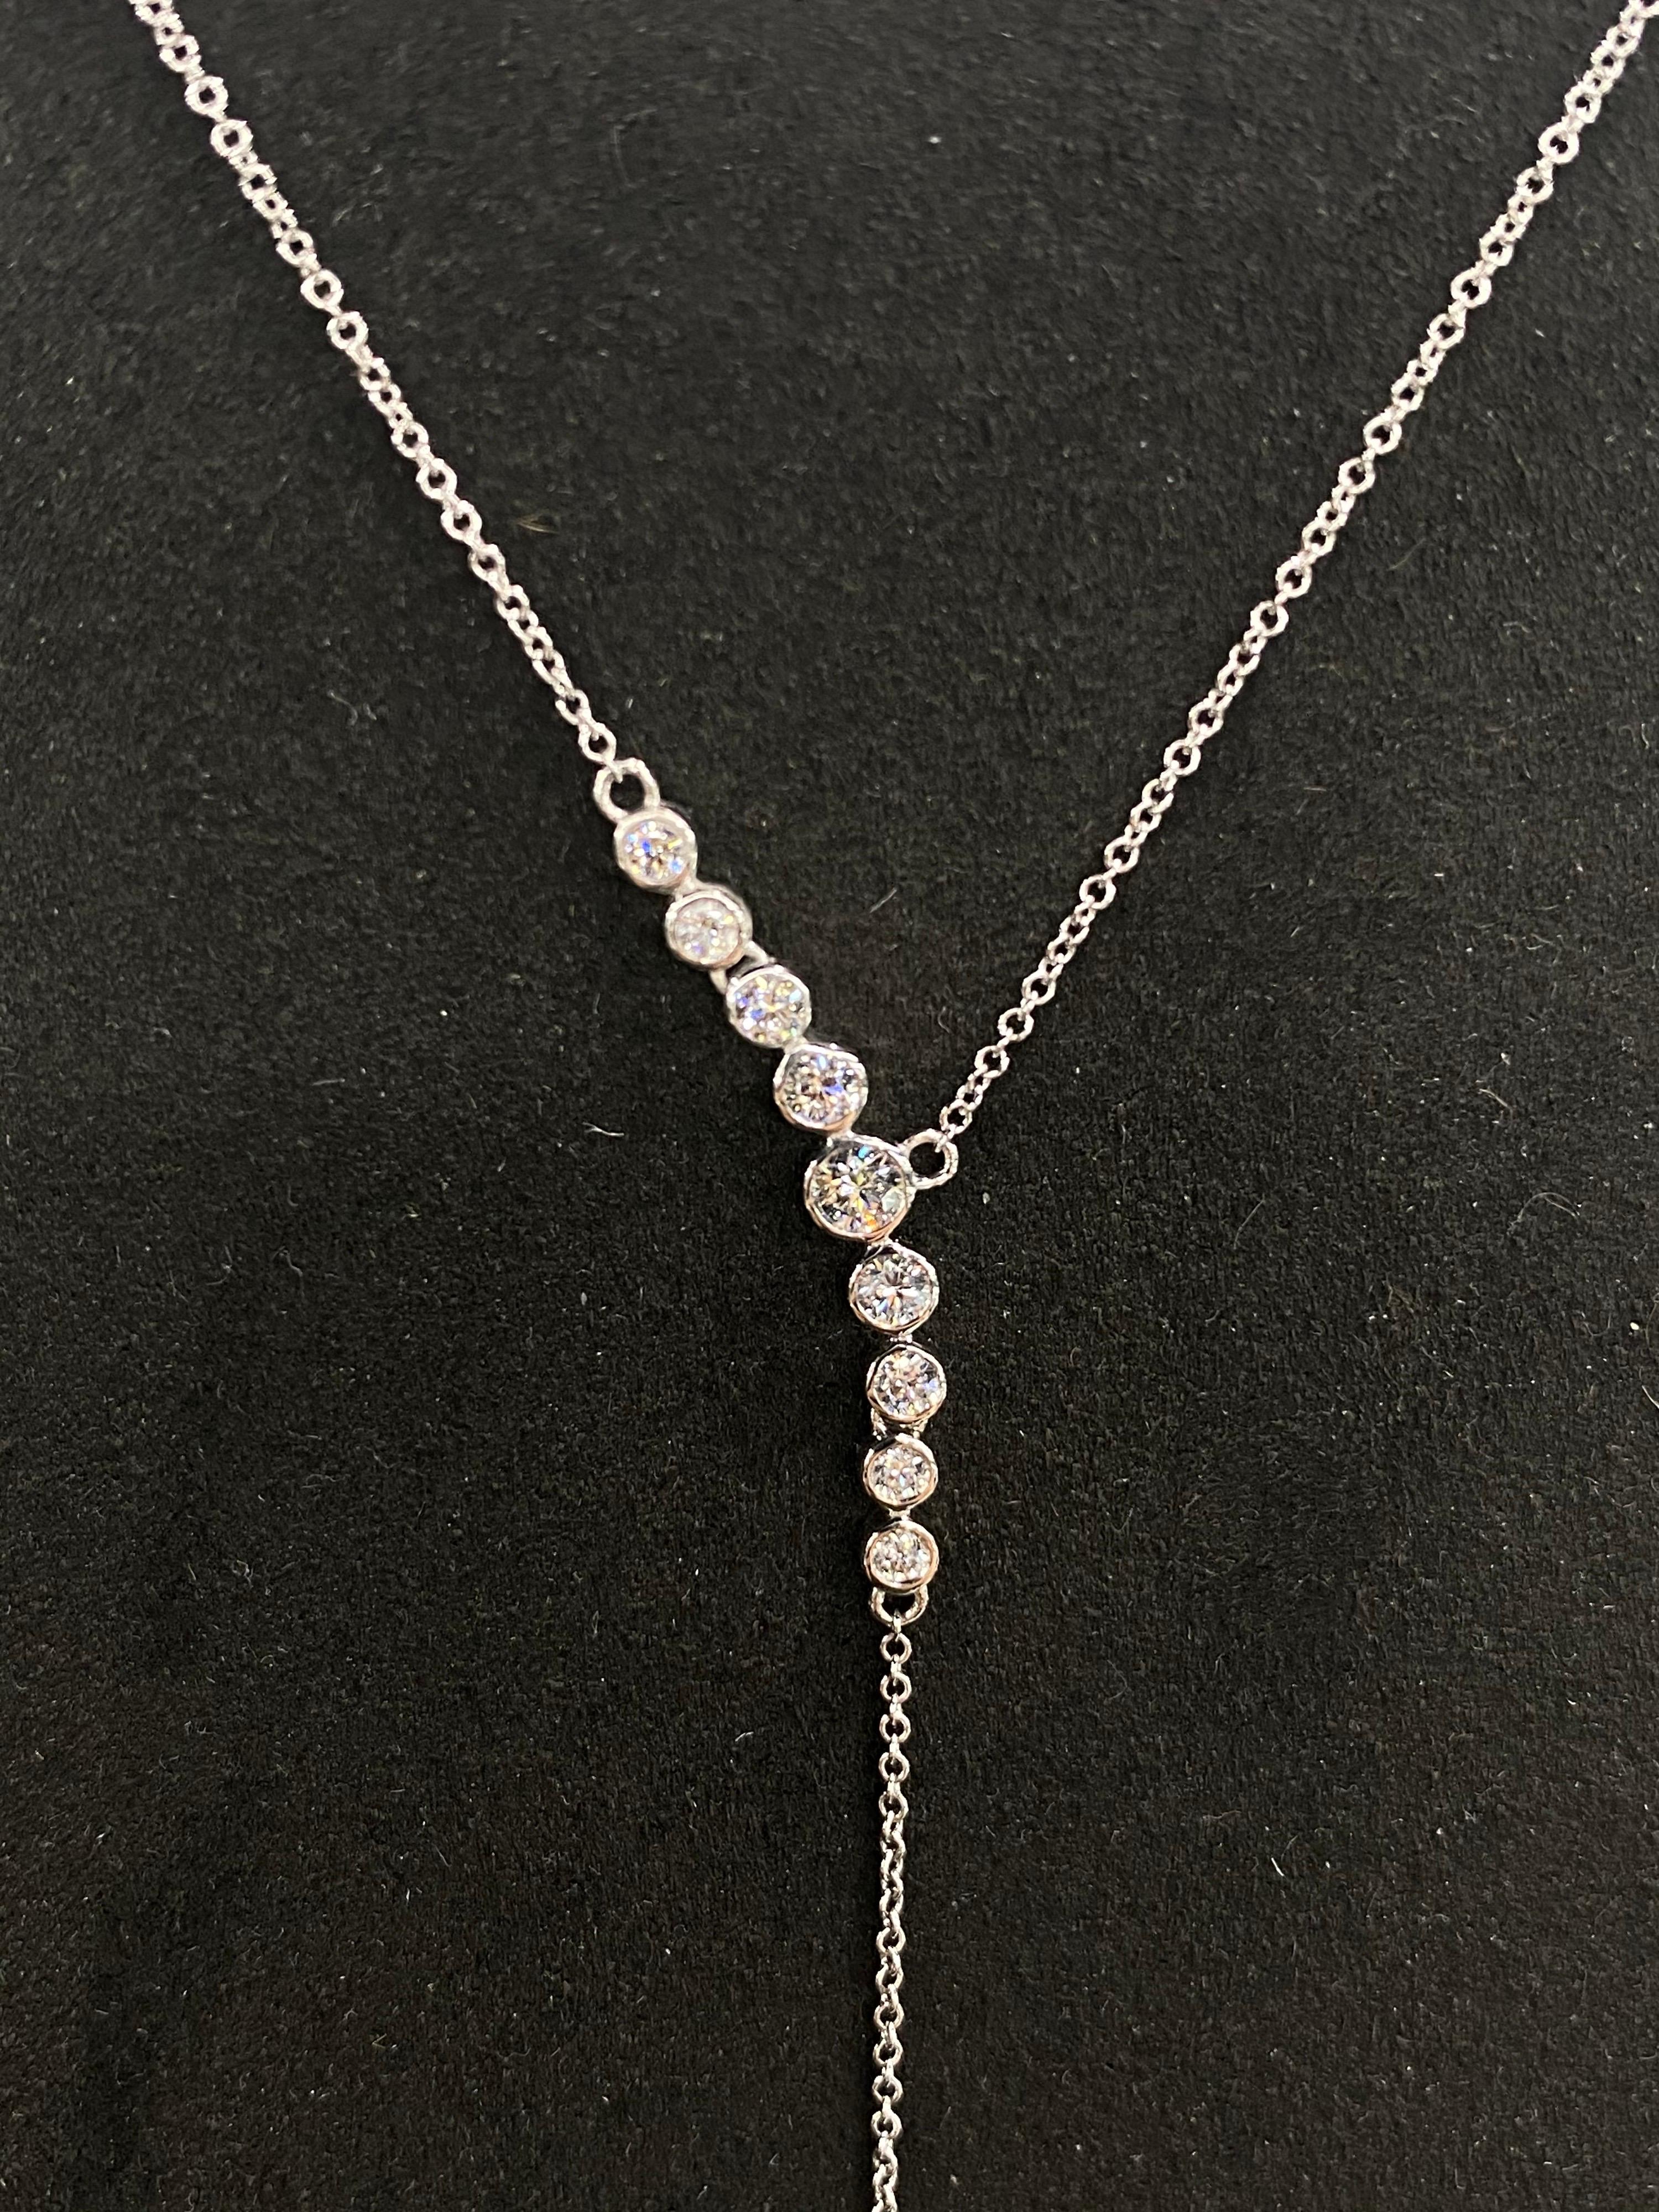 18K White gold lariat necklace featuring 8 round brilliants weighing 0.31 carats with a grey Tahitian pearl drop measuring 13-14 mm and two round diamonds weighing 0.20 carats.
Color G-H
Clarity SI

Pearl can be changed to a Pink, White or White